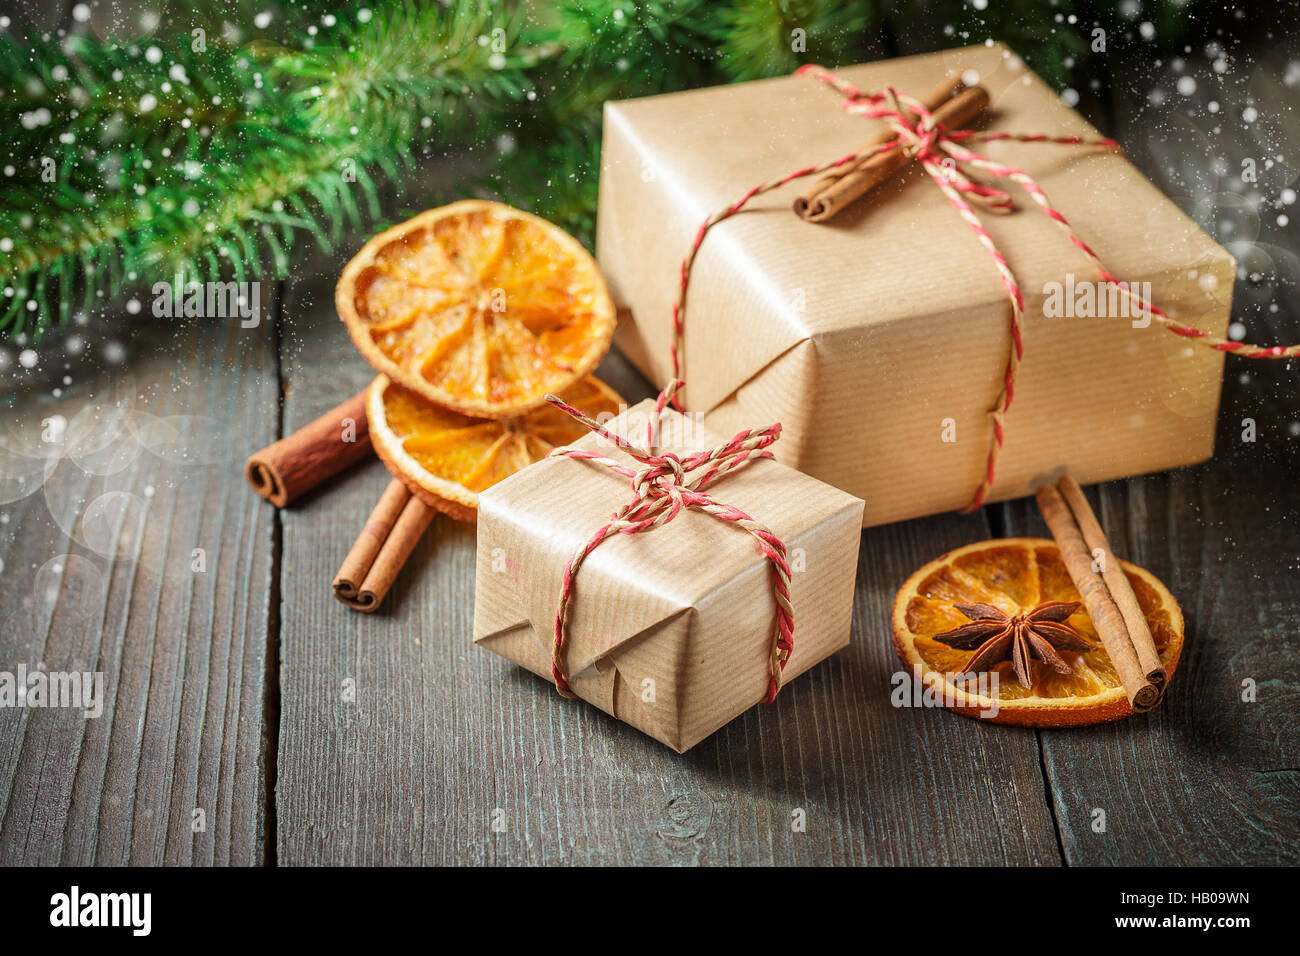 Christmas gifts, cinnamon, anise stars, dried orange slices and ...